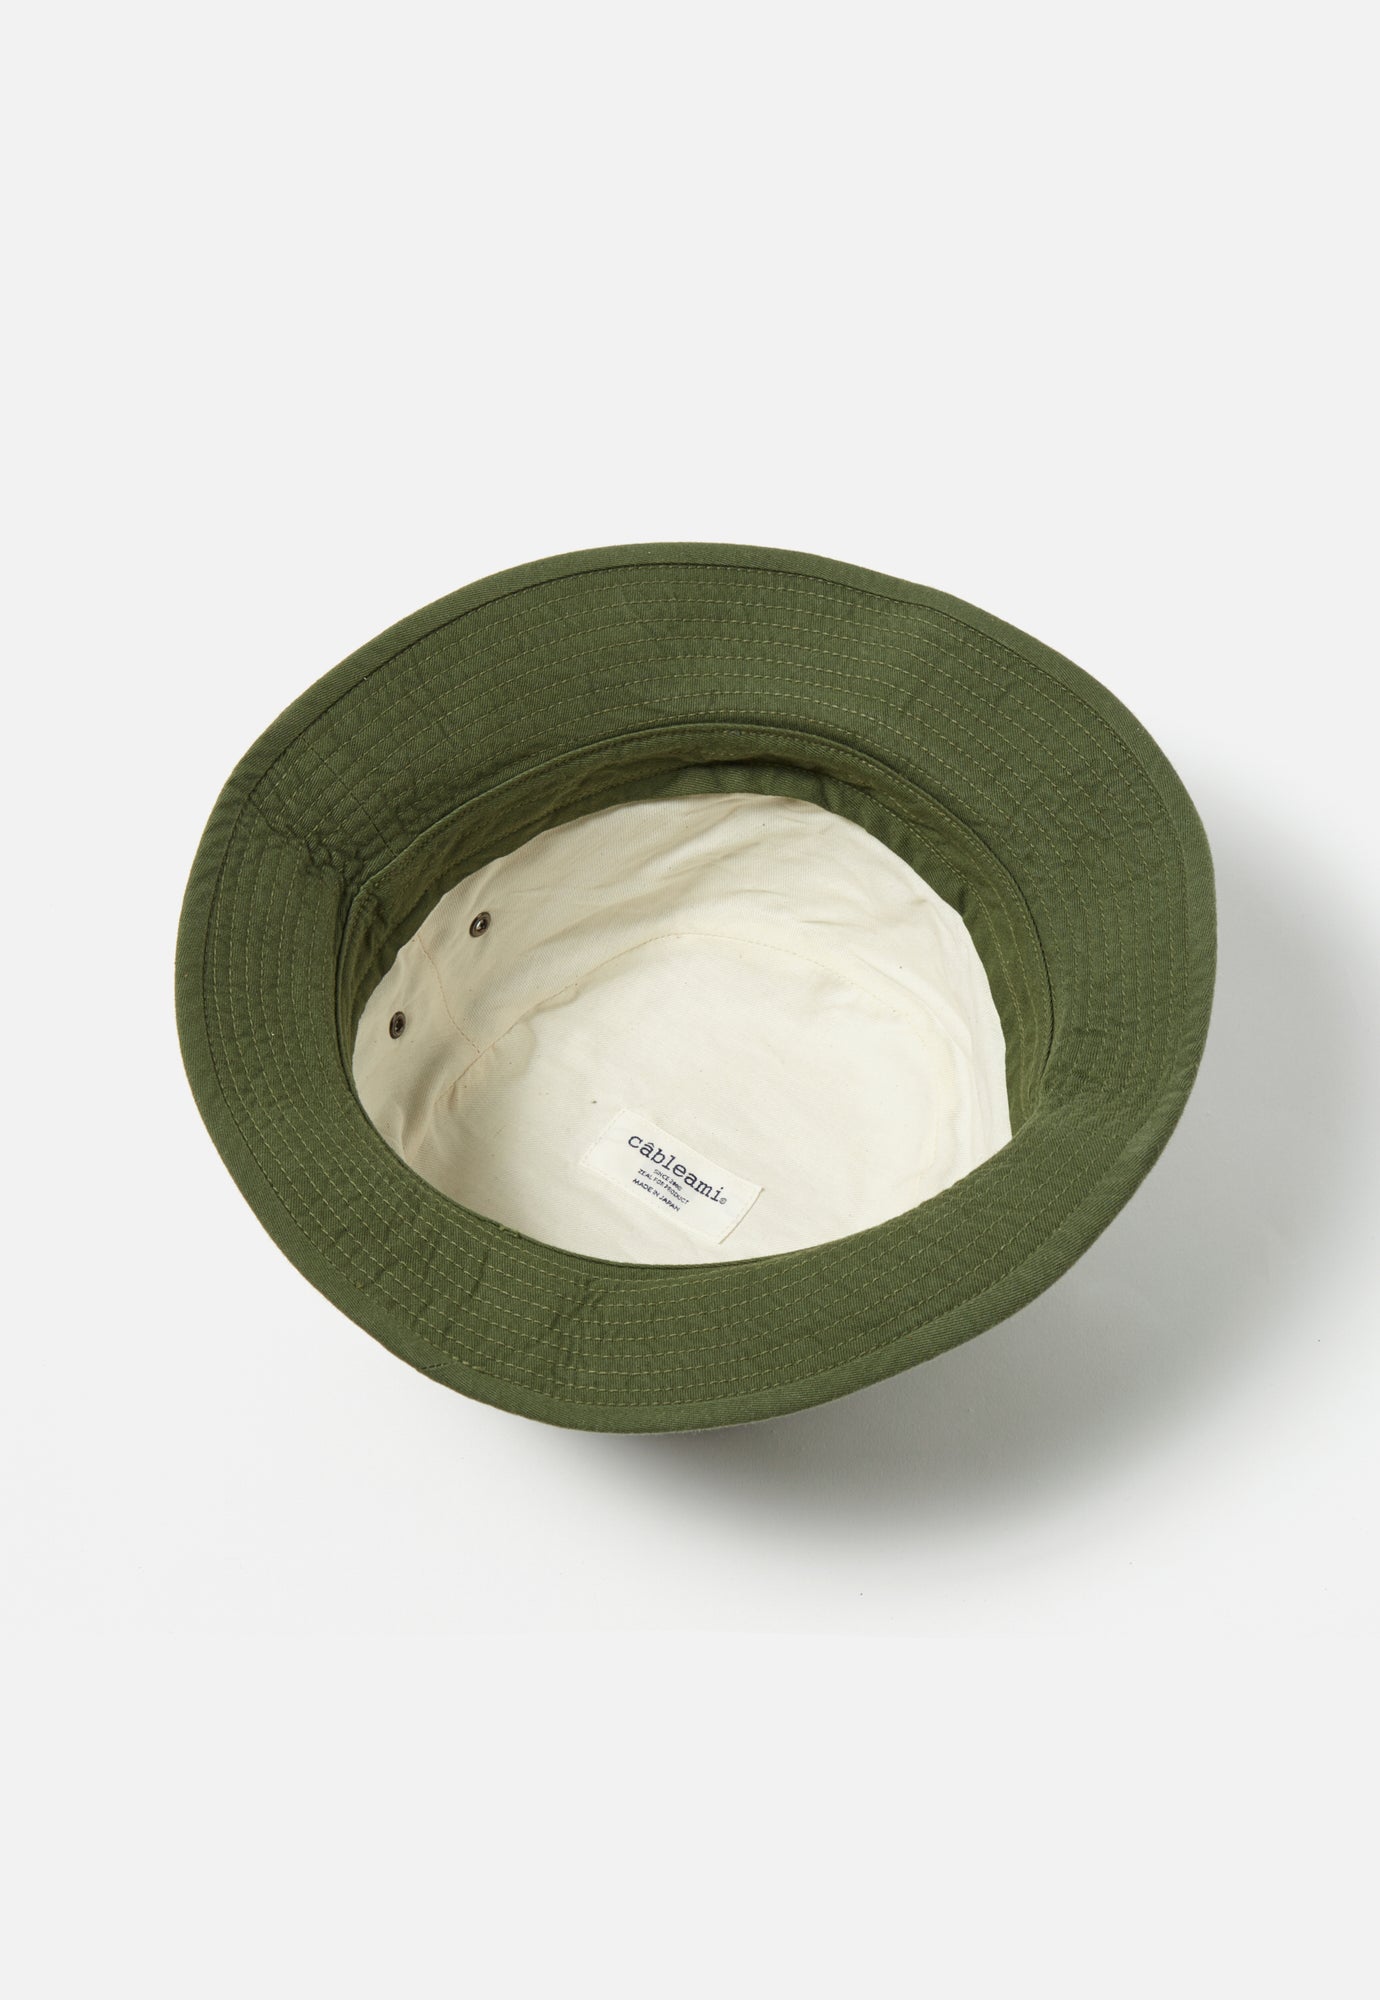 cableami® Pork Pie Hat in Olive Chino Cotton